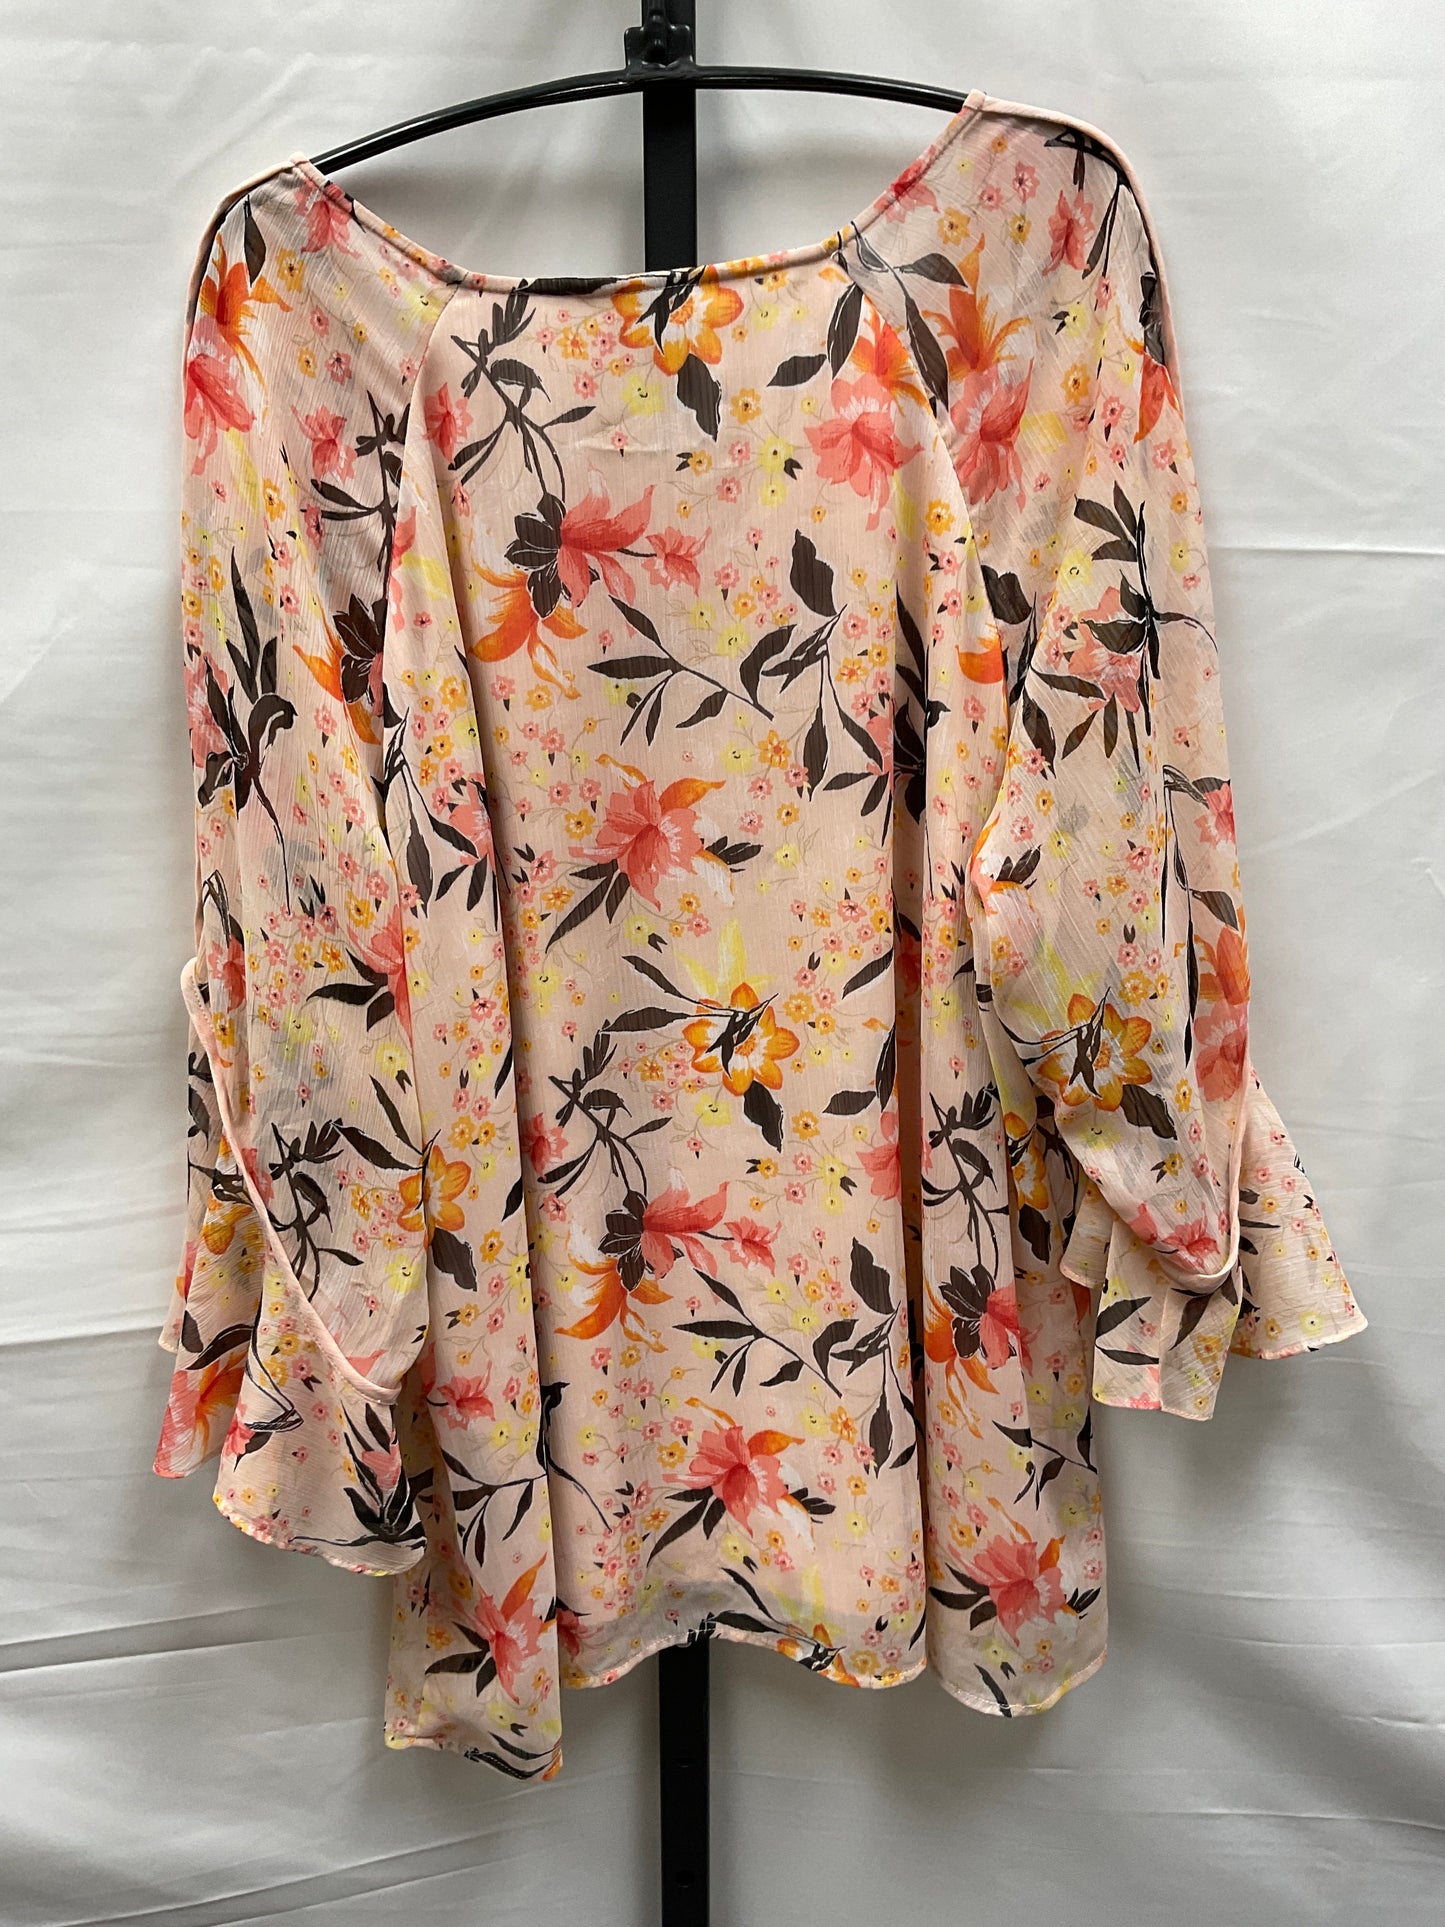 Floral Print Top Long Sleeve Christopher And Banks, Size Xl